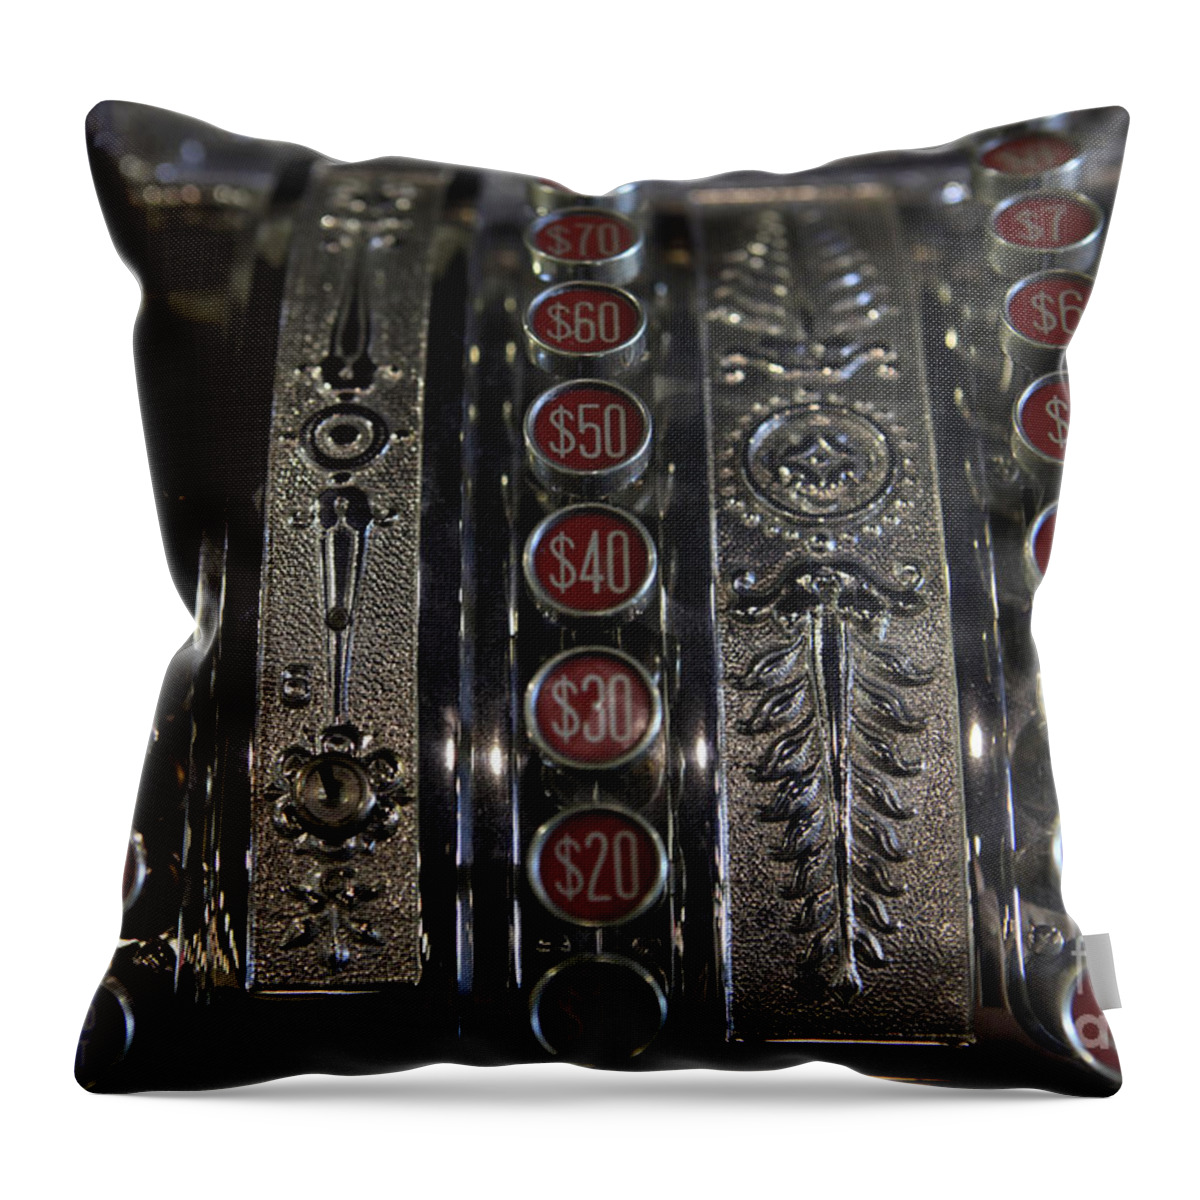 Cash Register Throw Pillow featuring the photograph Cash Register by Nina Prommer